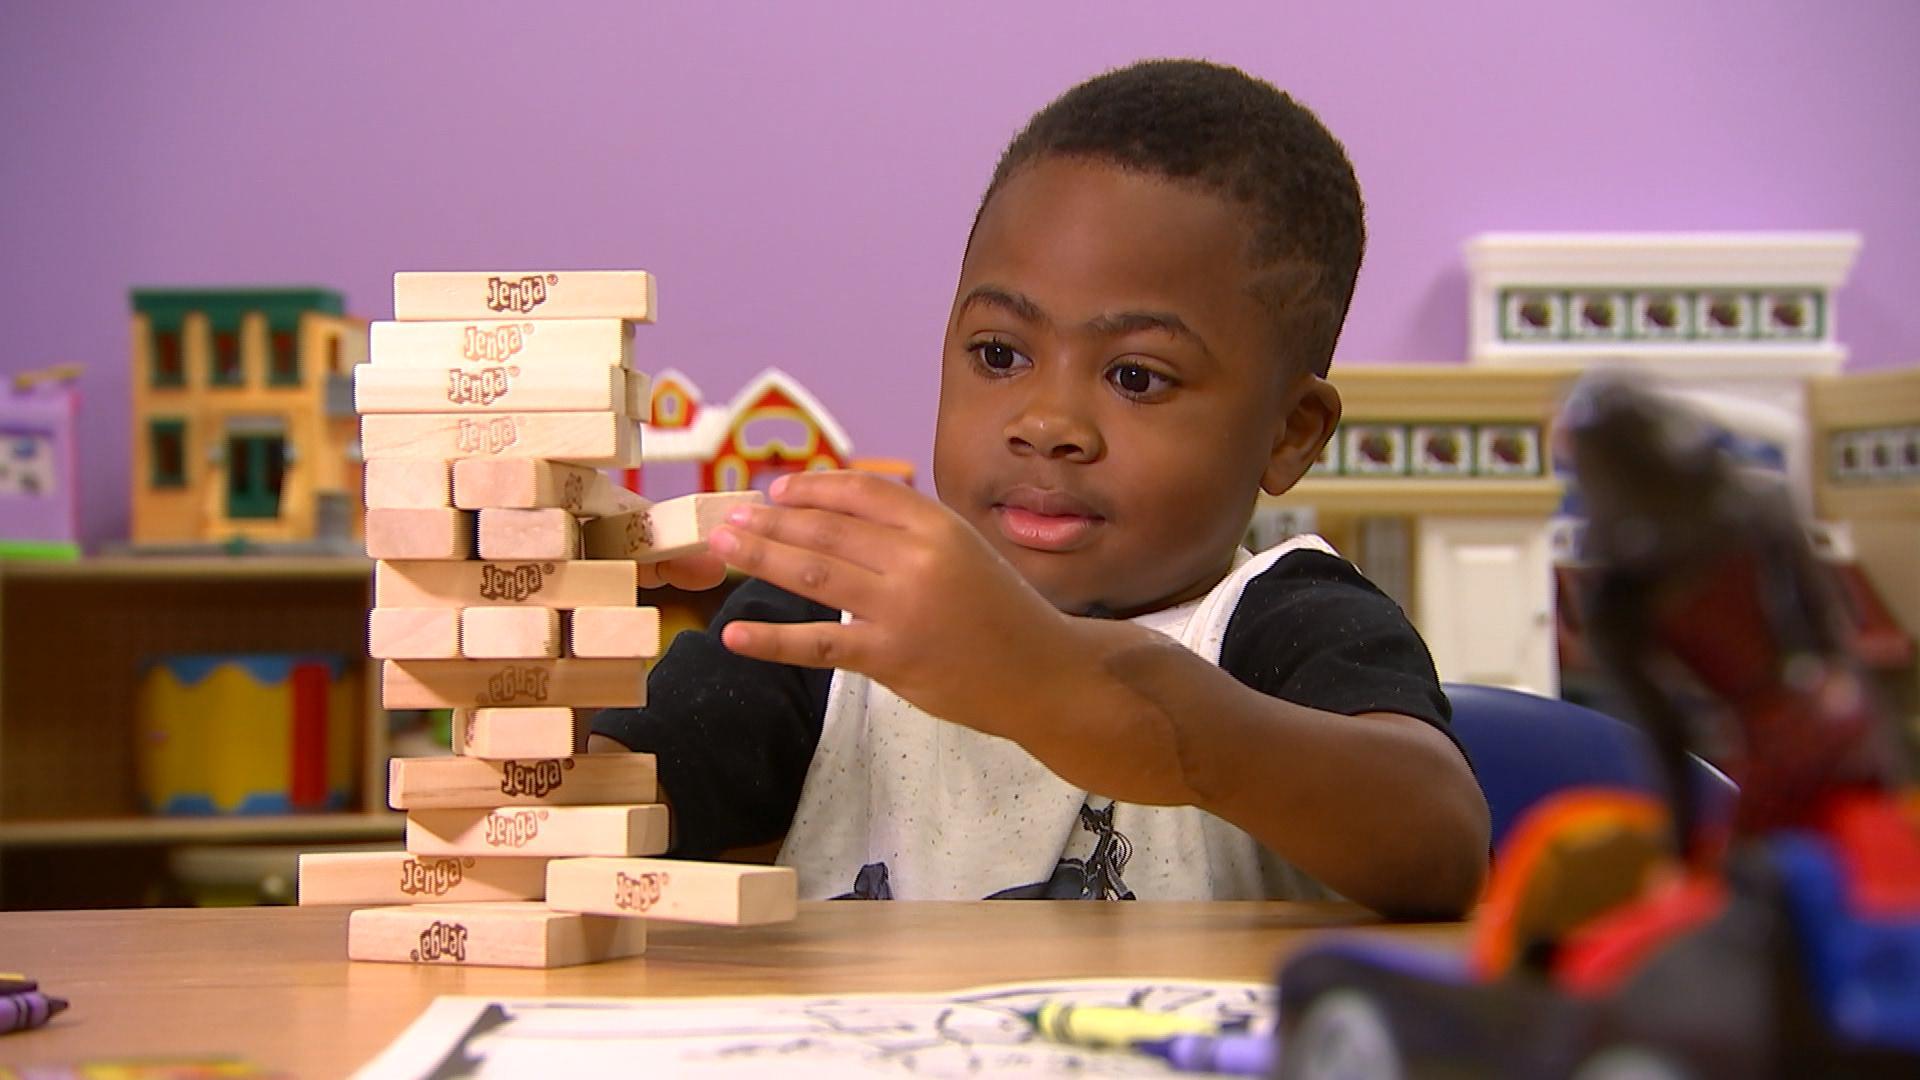 Zion Harvey Does Push-Ups One Year After Double Hand Transplant - NBC News1920 x 1080